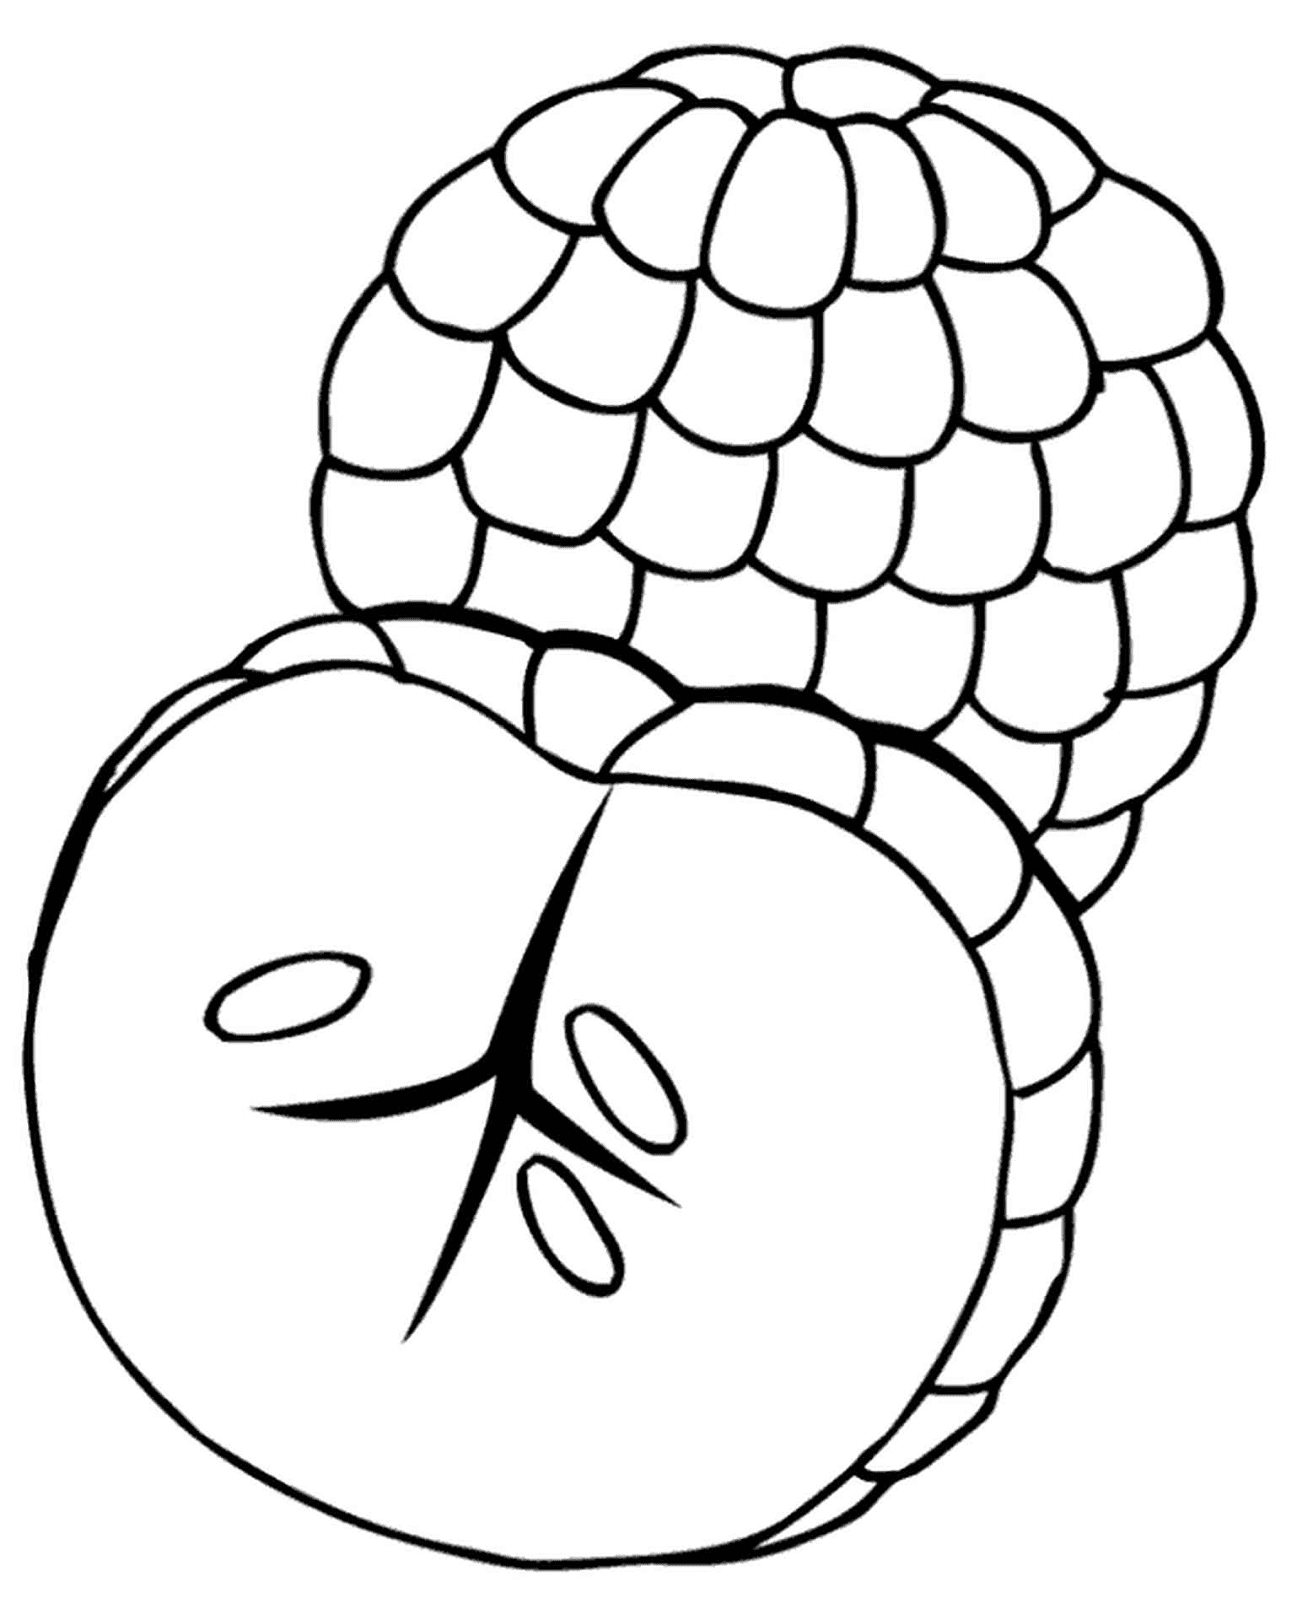 Exotic Fruit Coloring Page